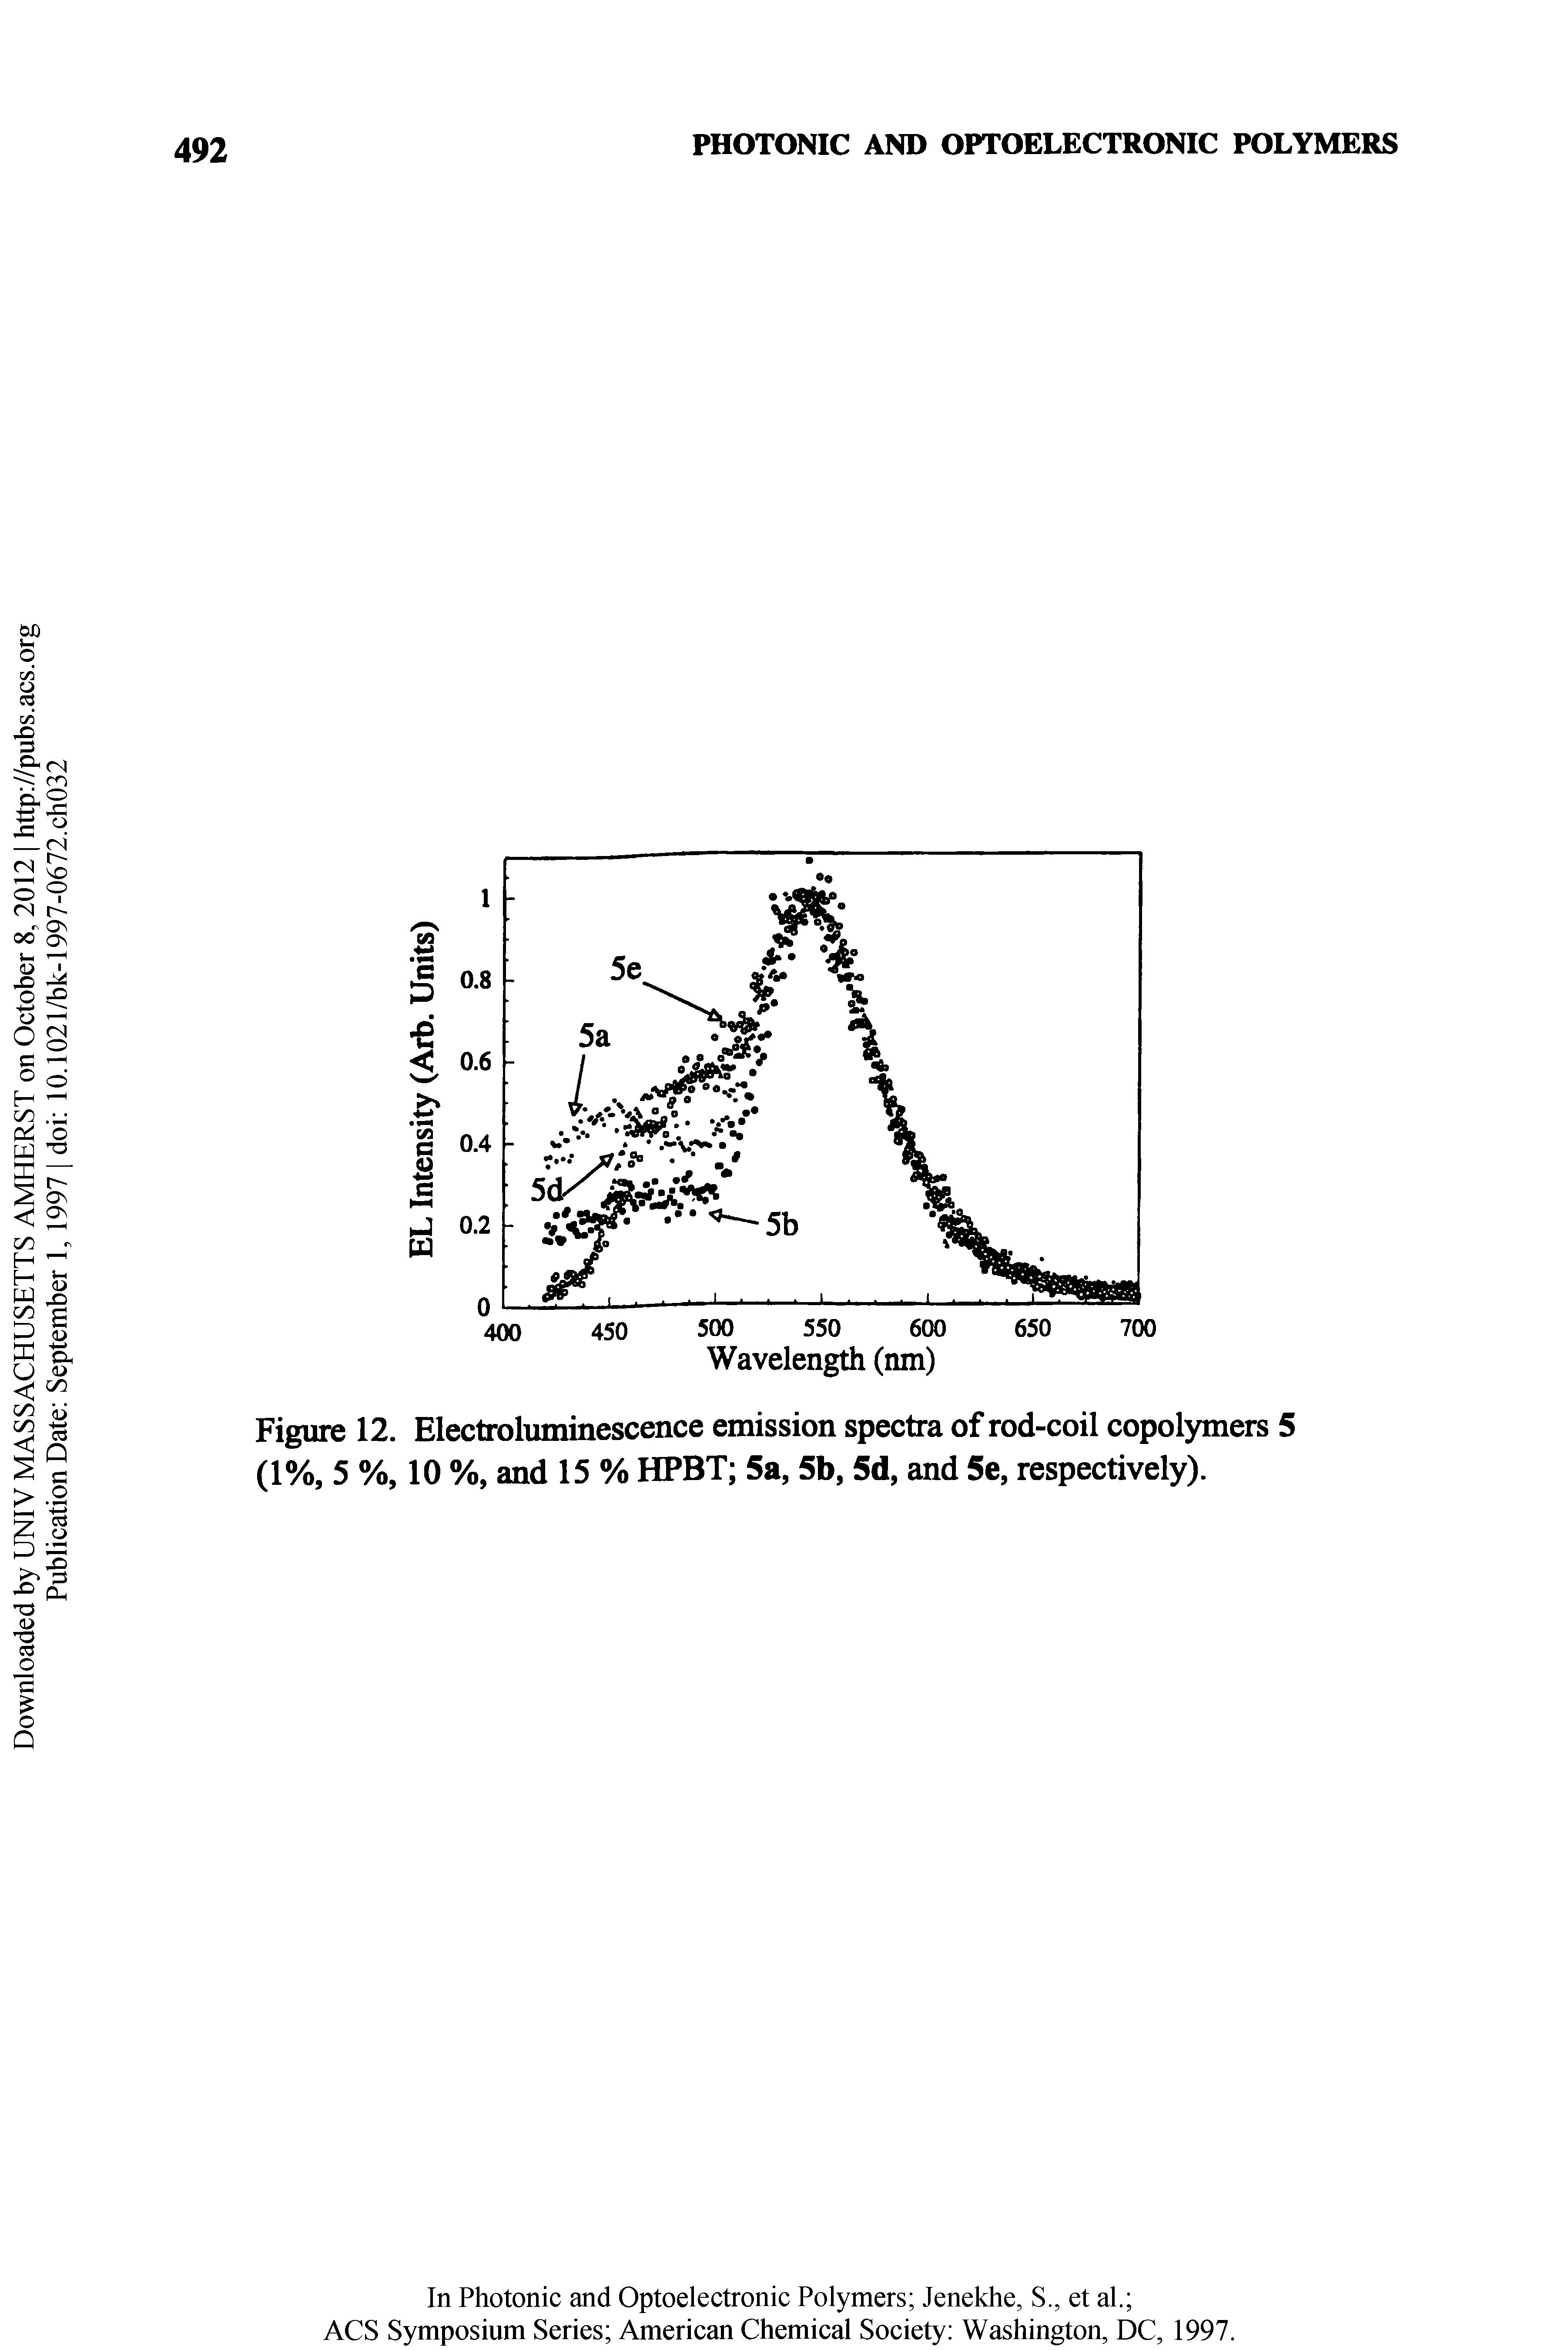 Figure 12. Electroluminescence emission spectra of rod-coil copolymers 5 (1%, 5 %, 10 %, and 15 % HPBT 5a, 5b, 5d, and 5e, respectively).